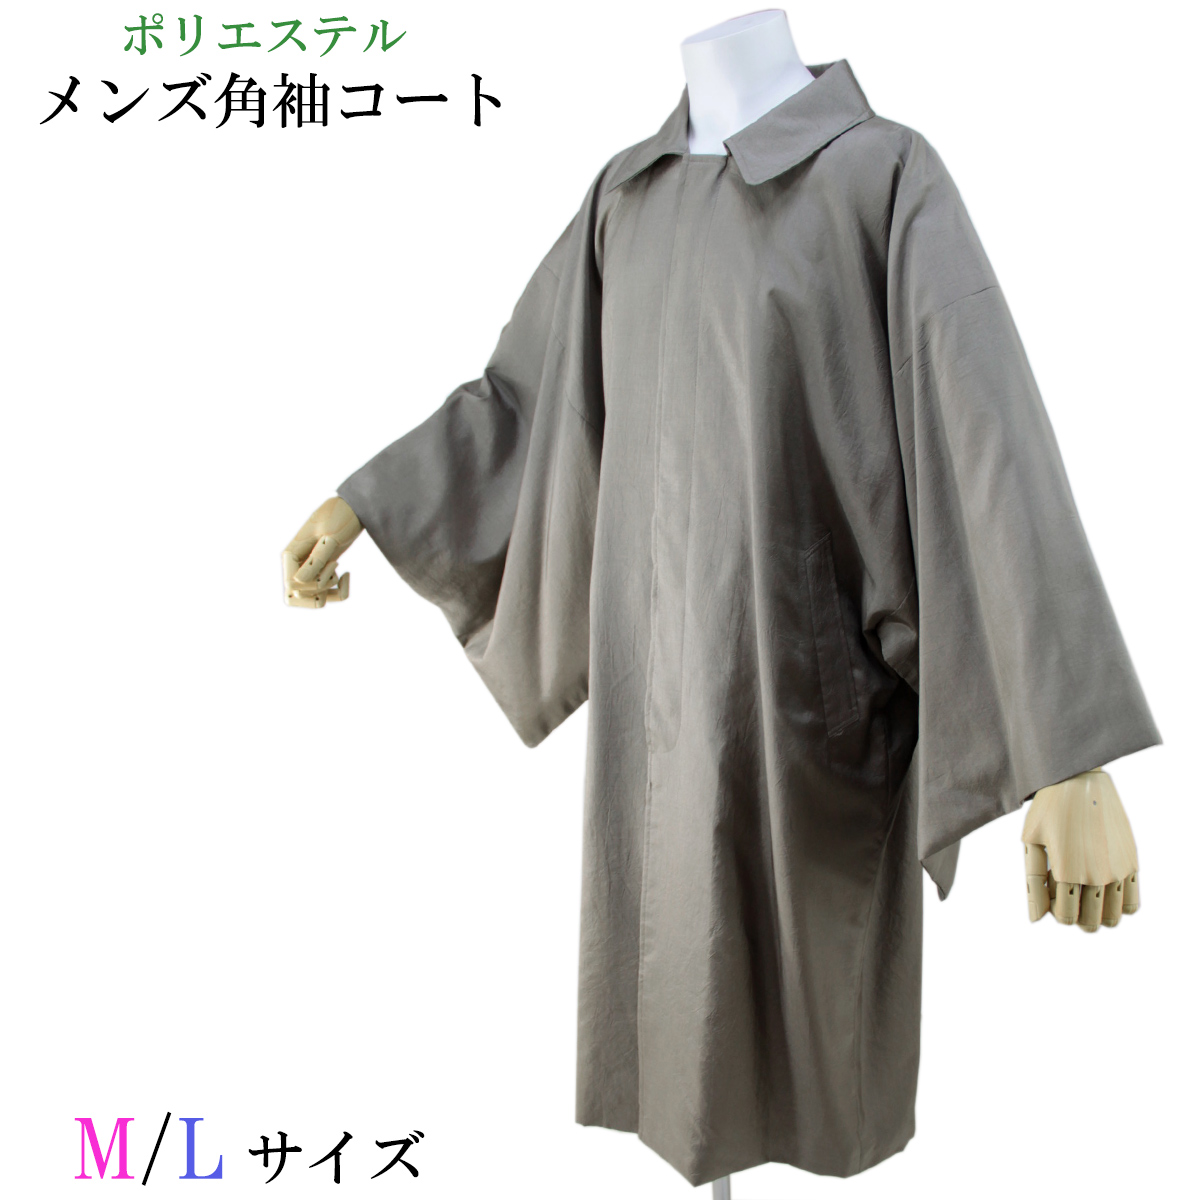  angle sleeve coat men's Japanese clothes coat polyester 100% beige M/L-size